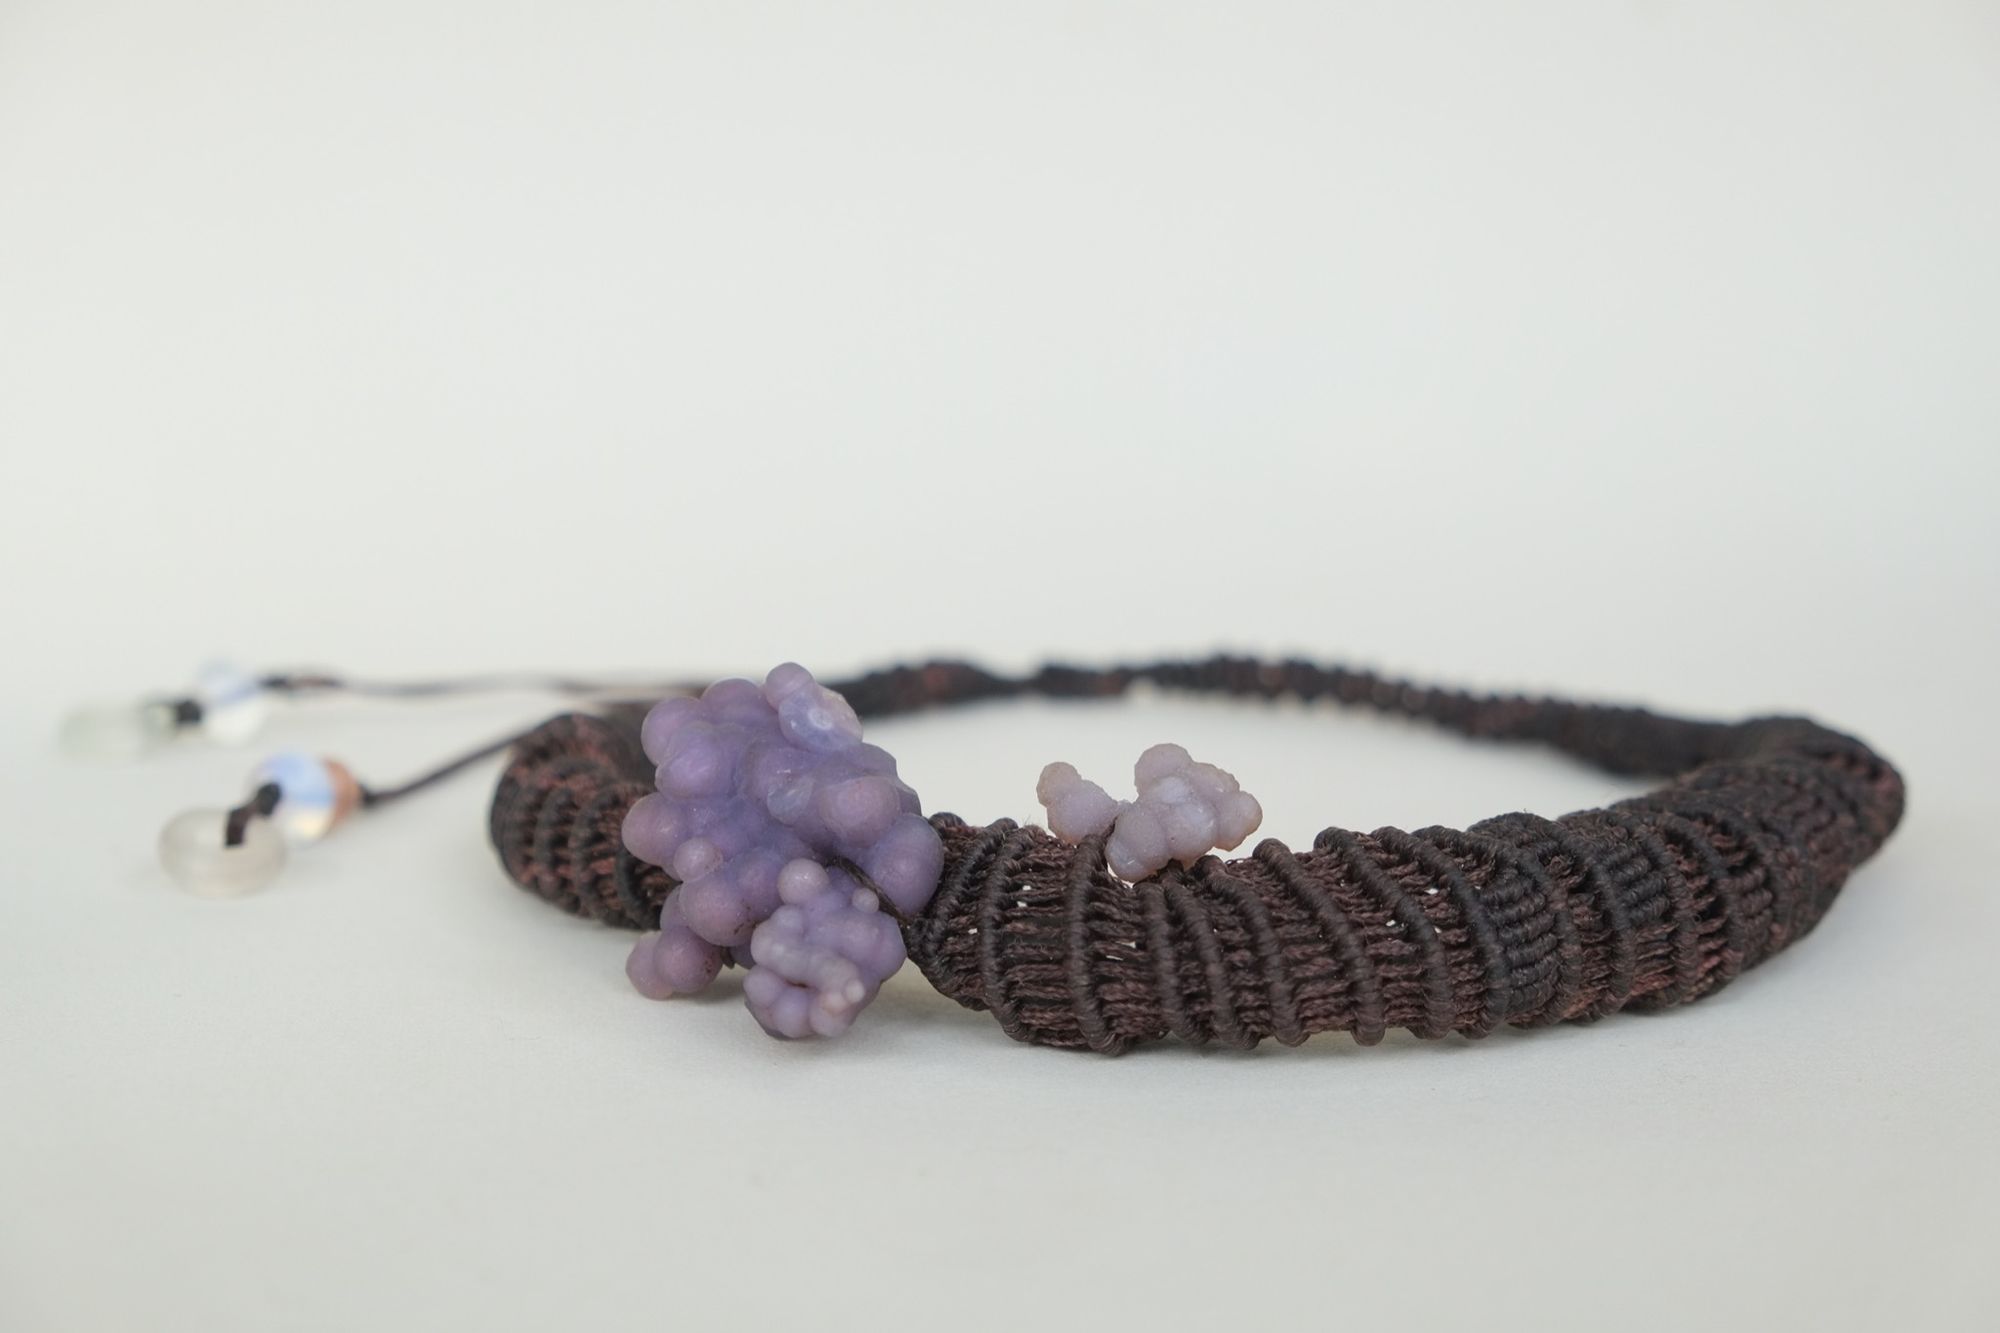 knot work necklace made with dark purple thread and purple grape chalcedony on a white backdrop